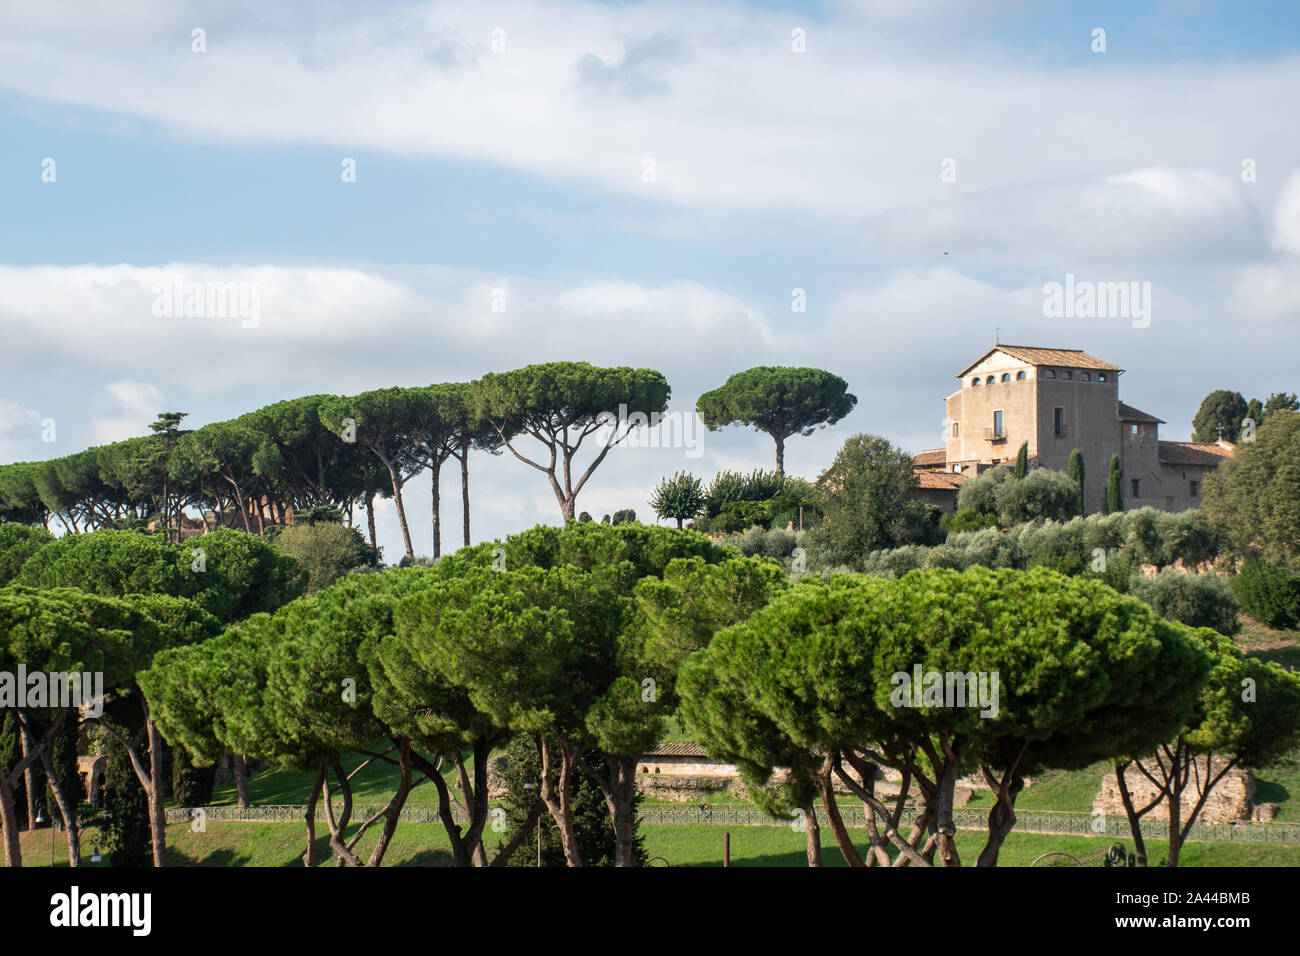 Palatine Hill Rome with Umbrella pine trees in foreground and buiding behind Stock Photo